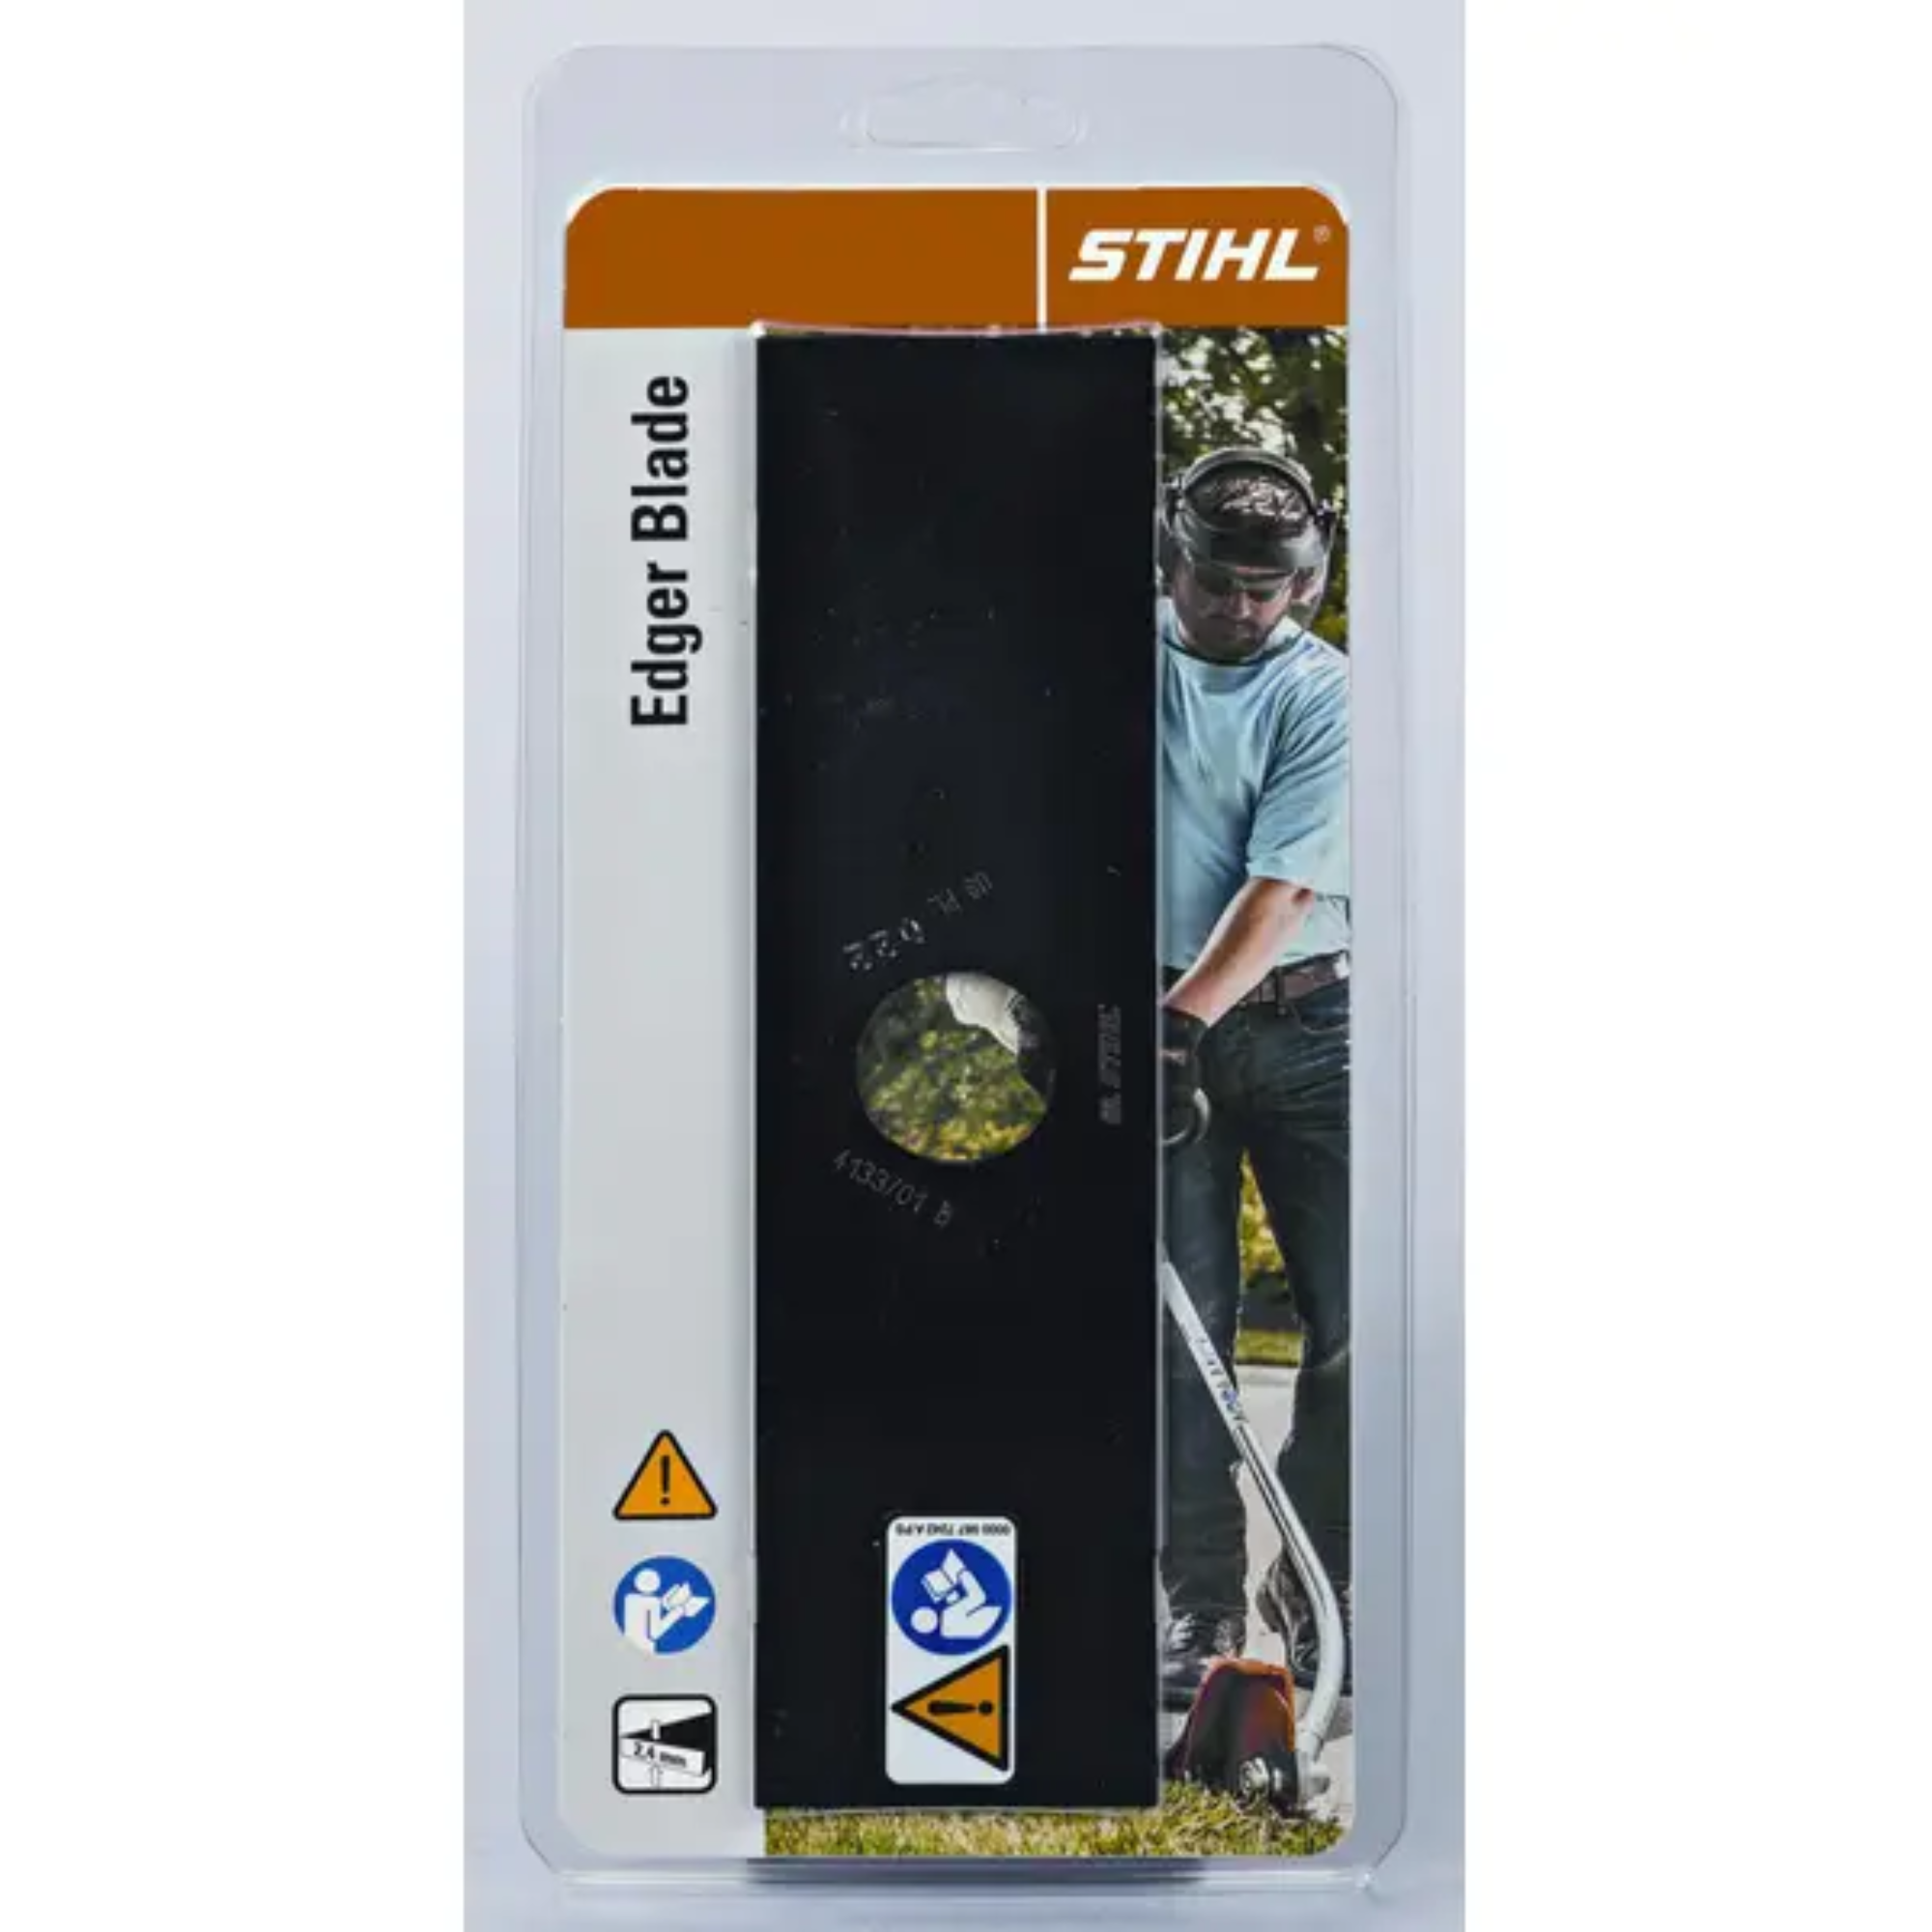 Stihl Clamshell Edger Blade 8 in | 2.4mm  | 4133 713 4103